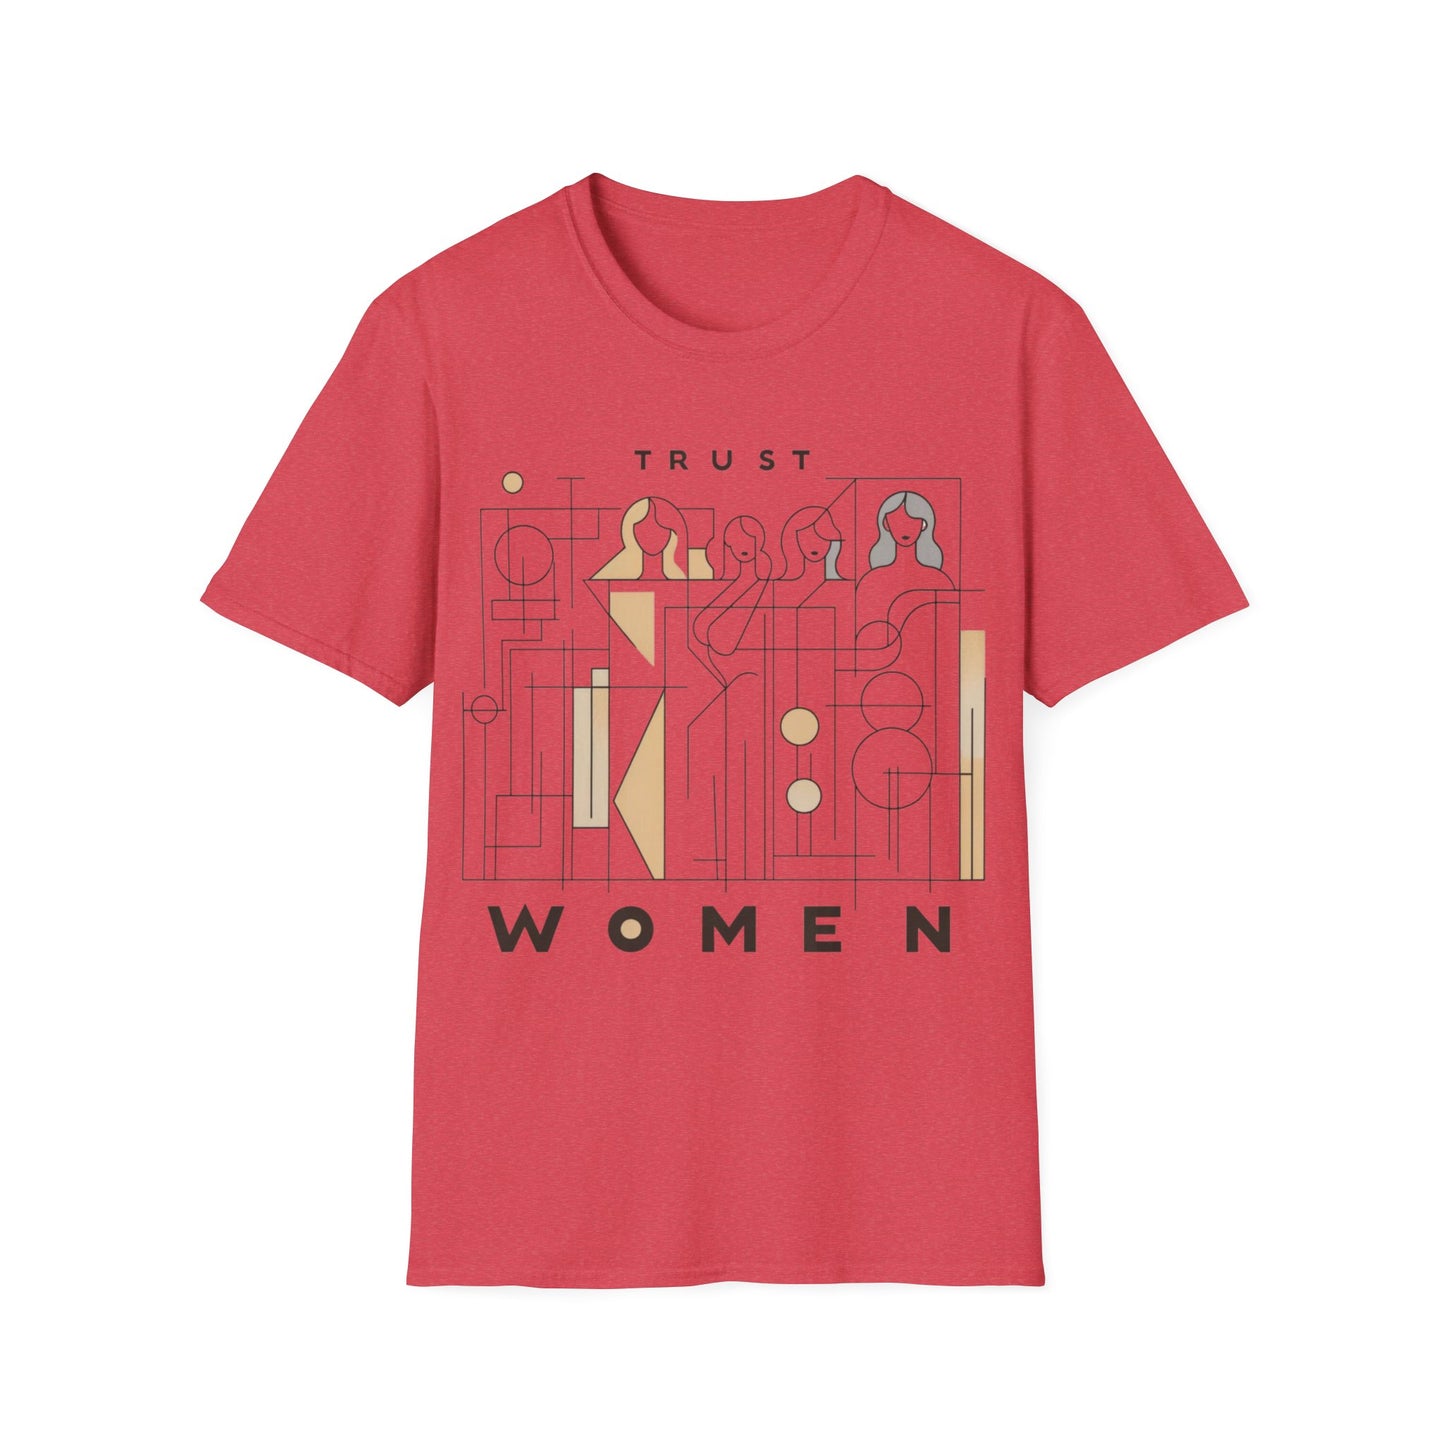 Trust Women Bold Statement Soft Style T-Shirt |unisex| Political Activism, Demand Equality and Respect!